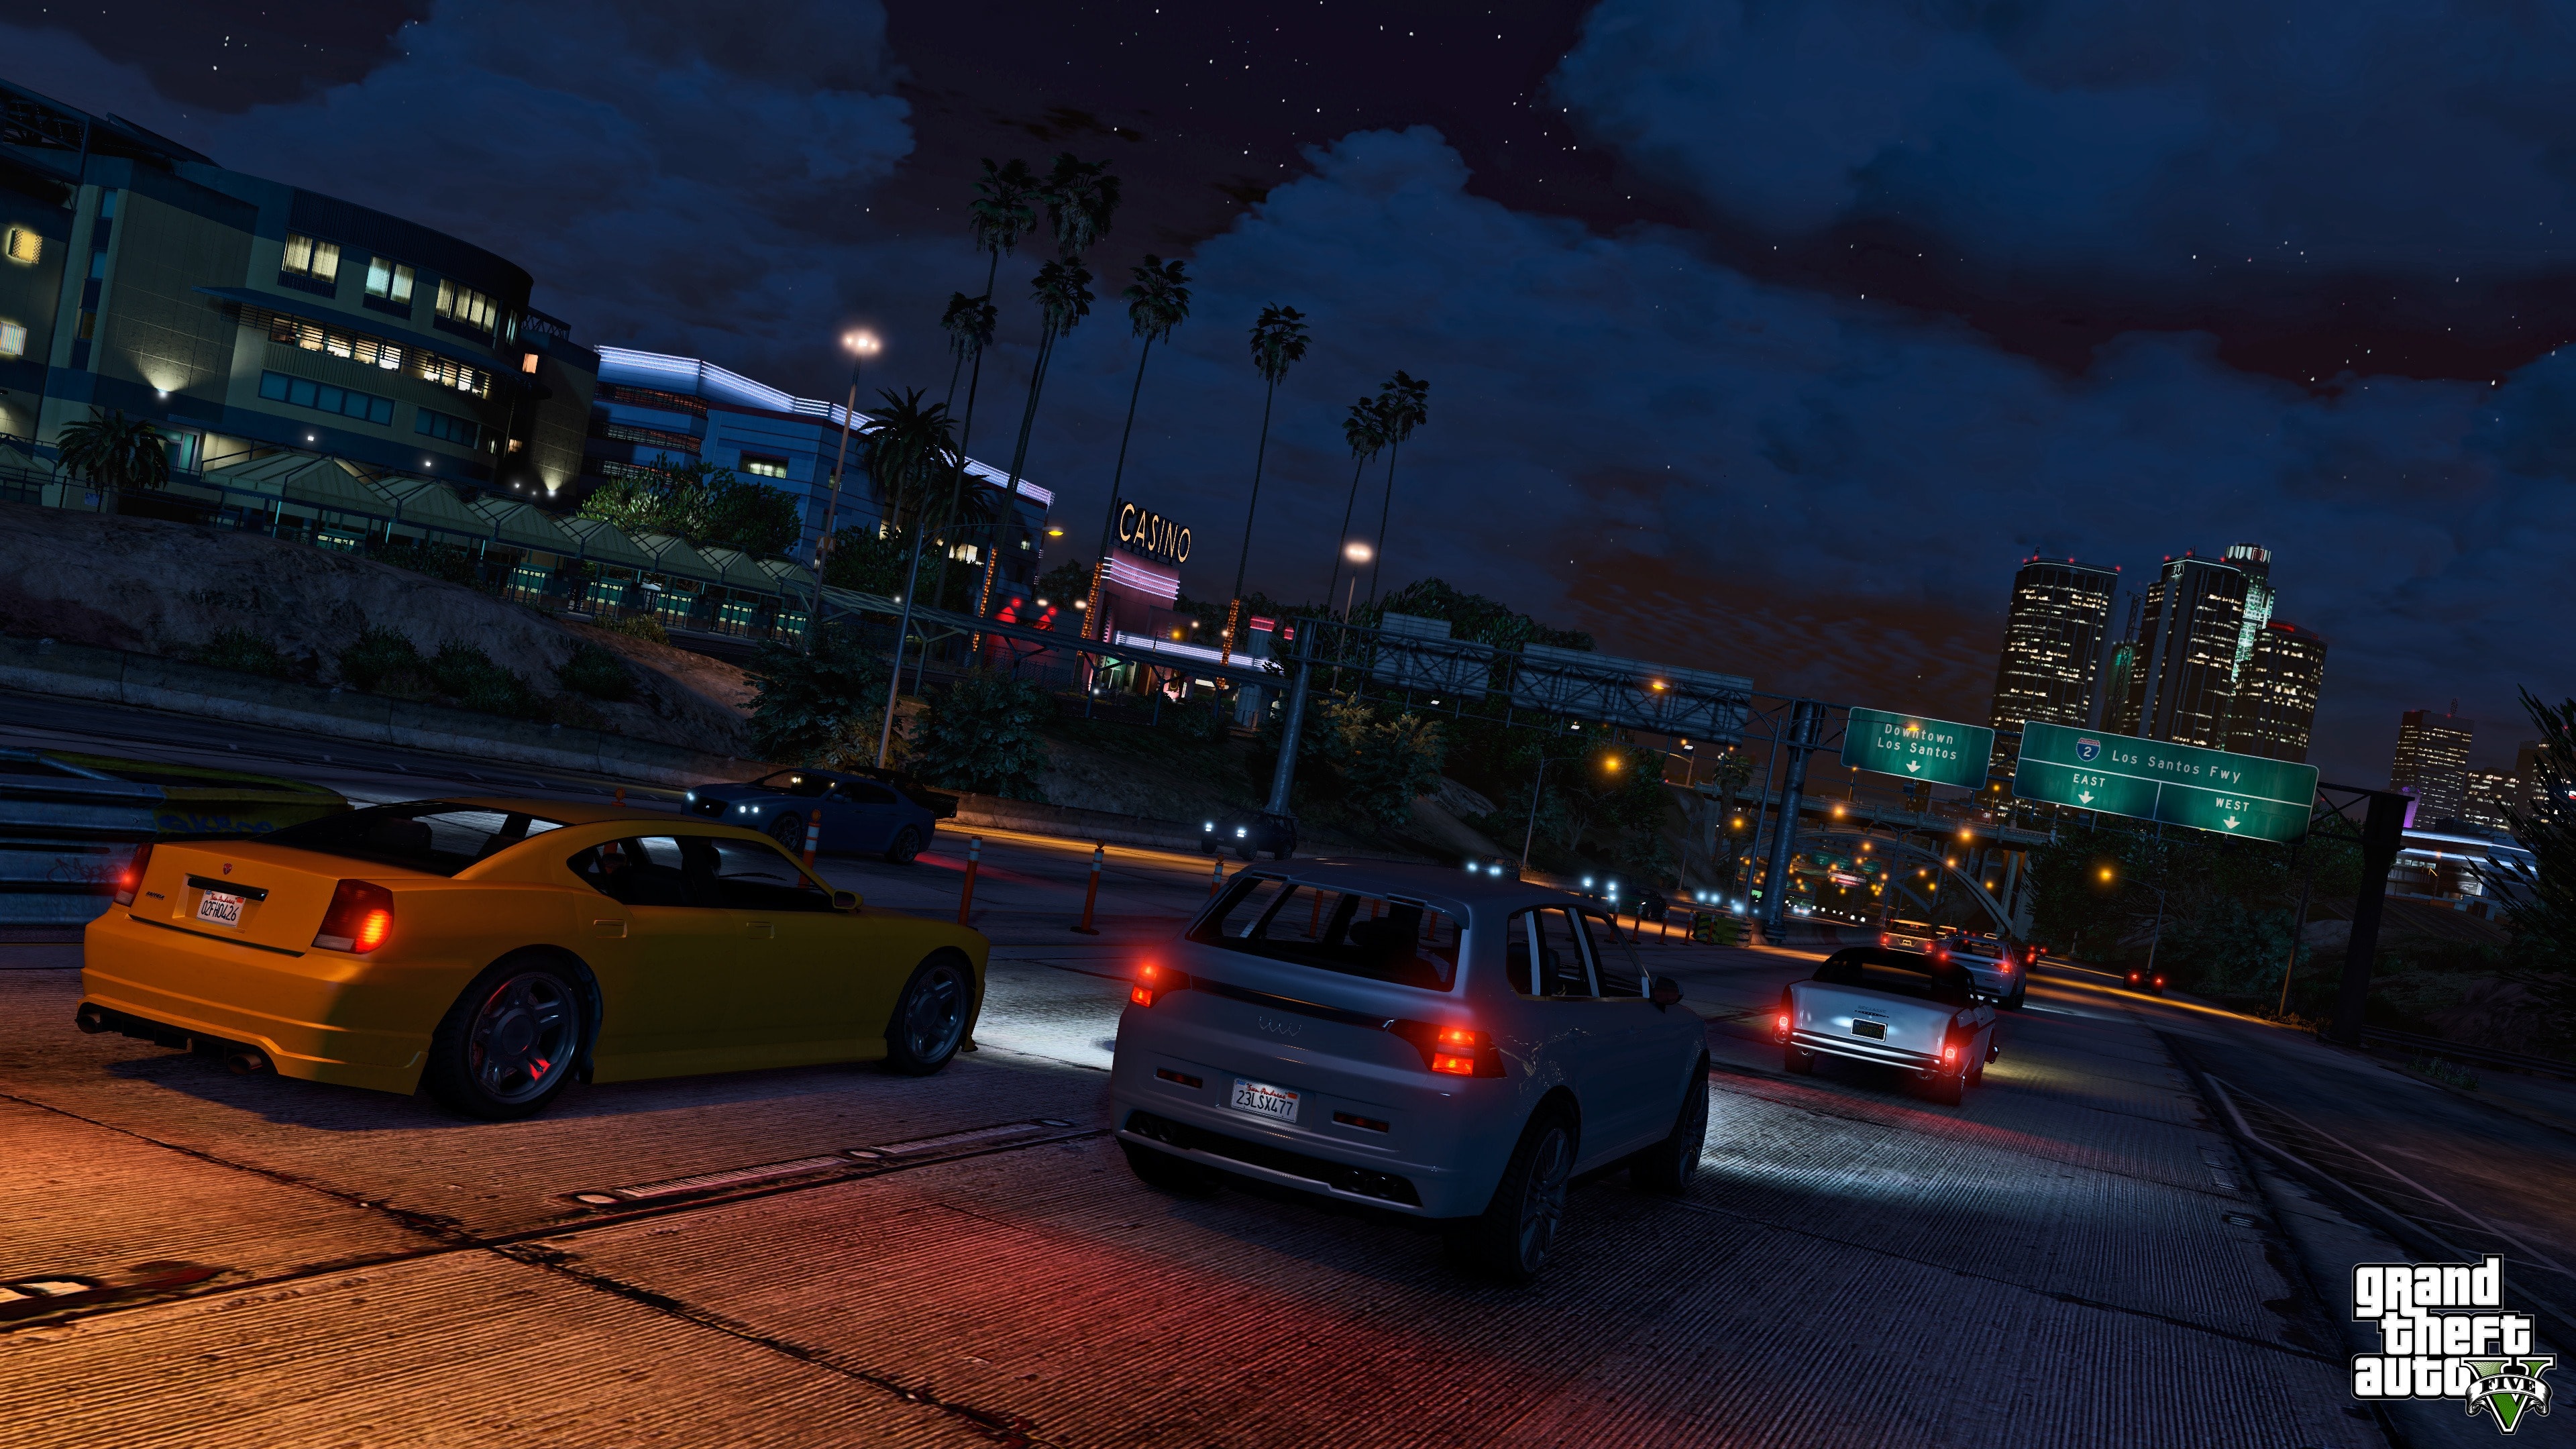 Here's a screenshot of GTA 6 posted by JackOLantern1982 which was